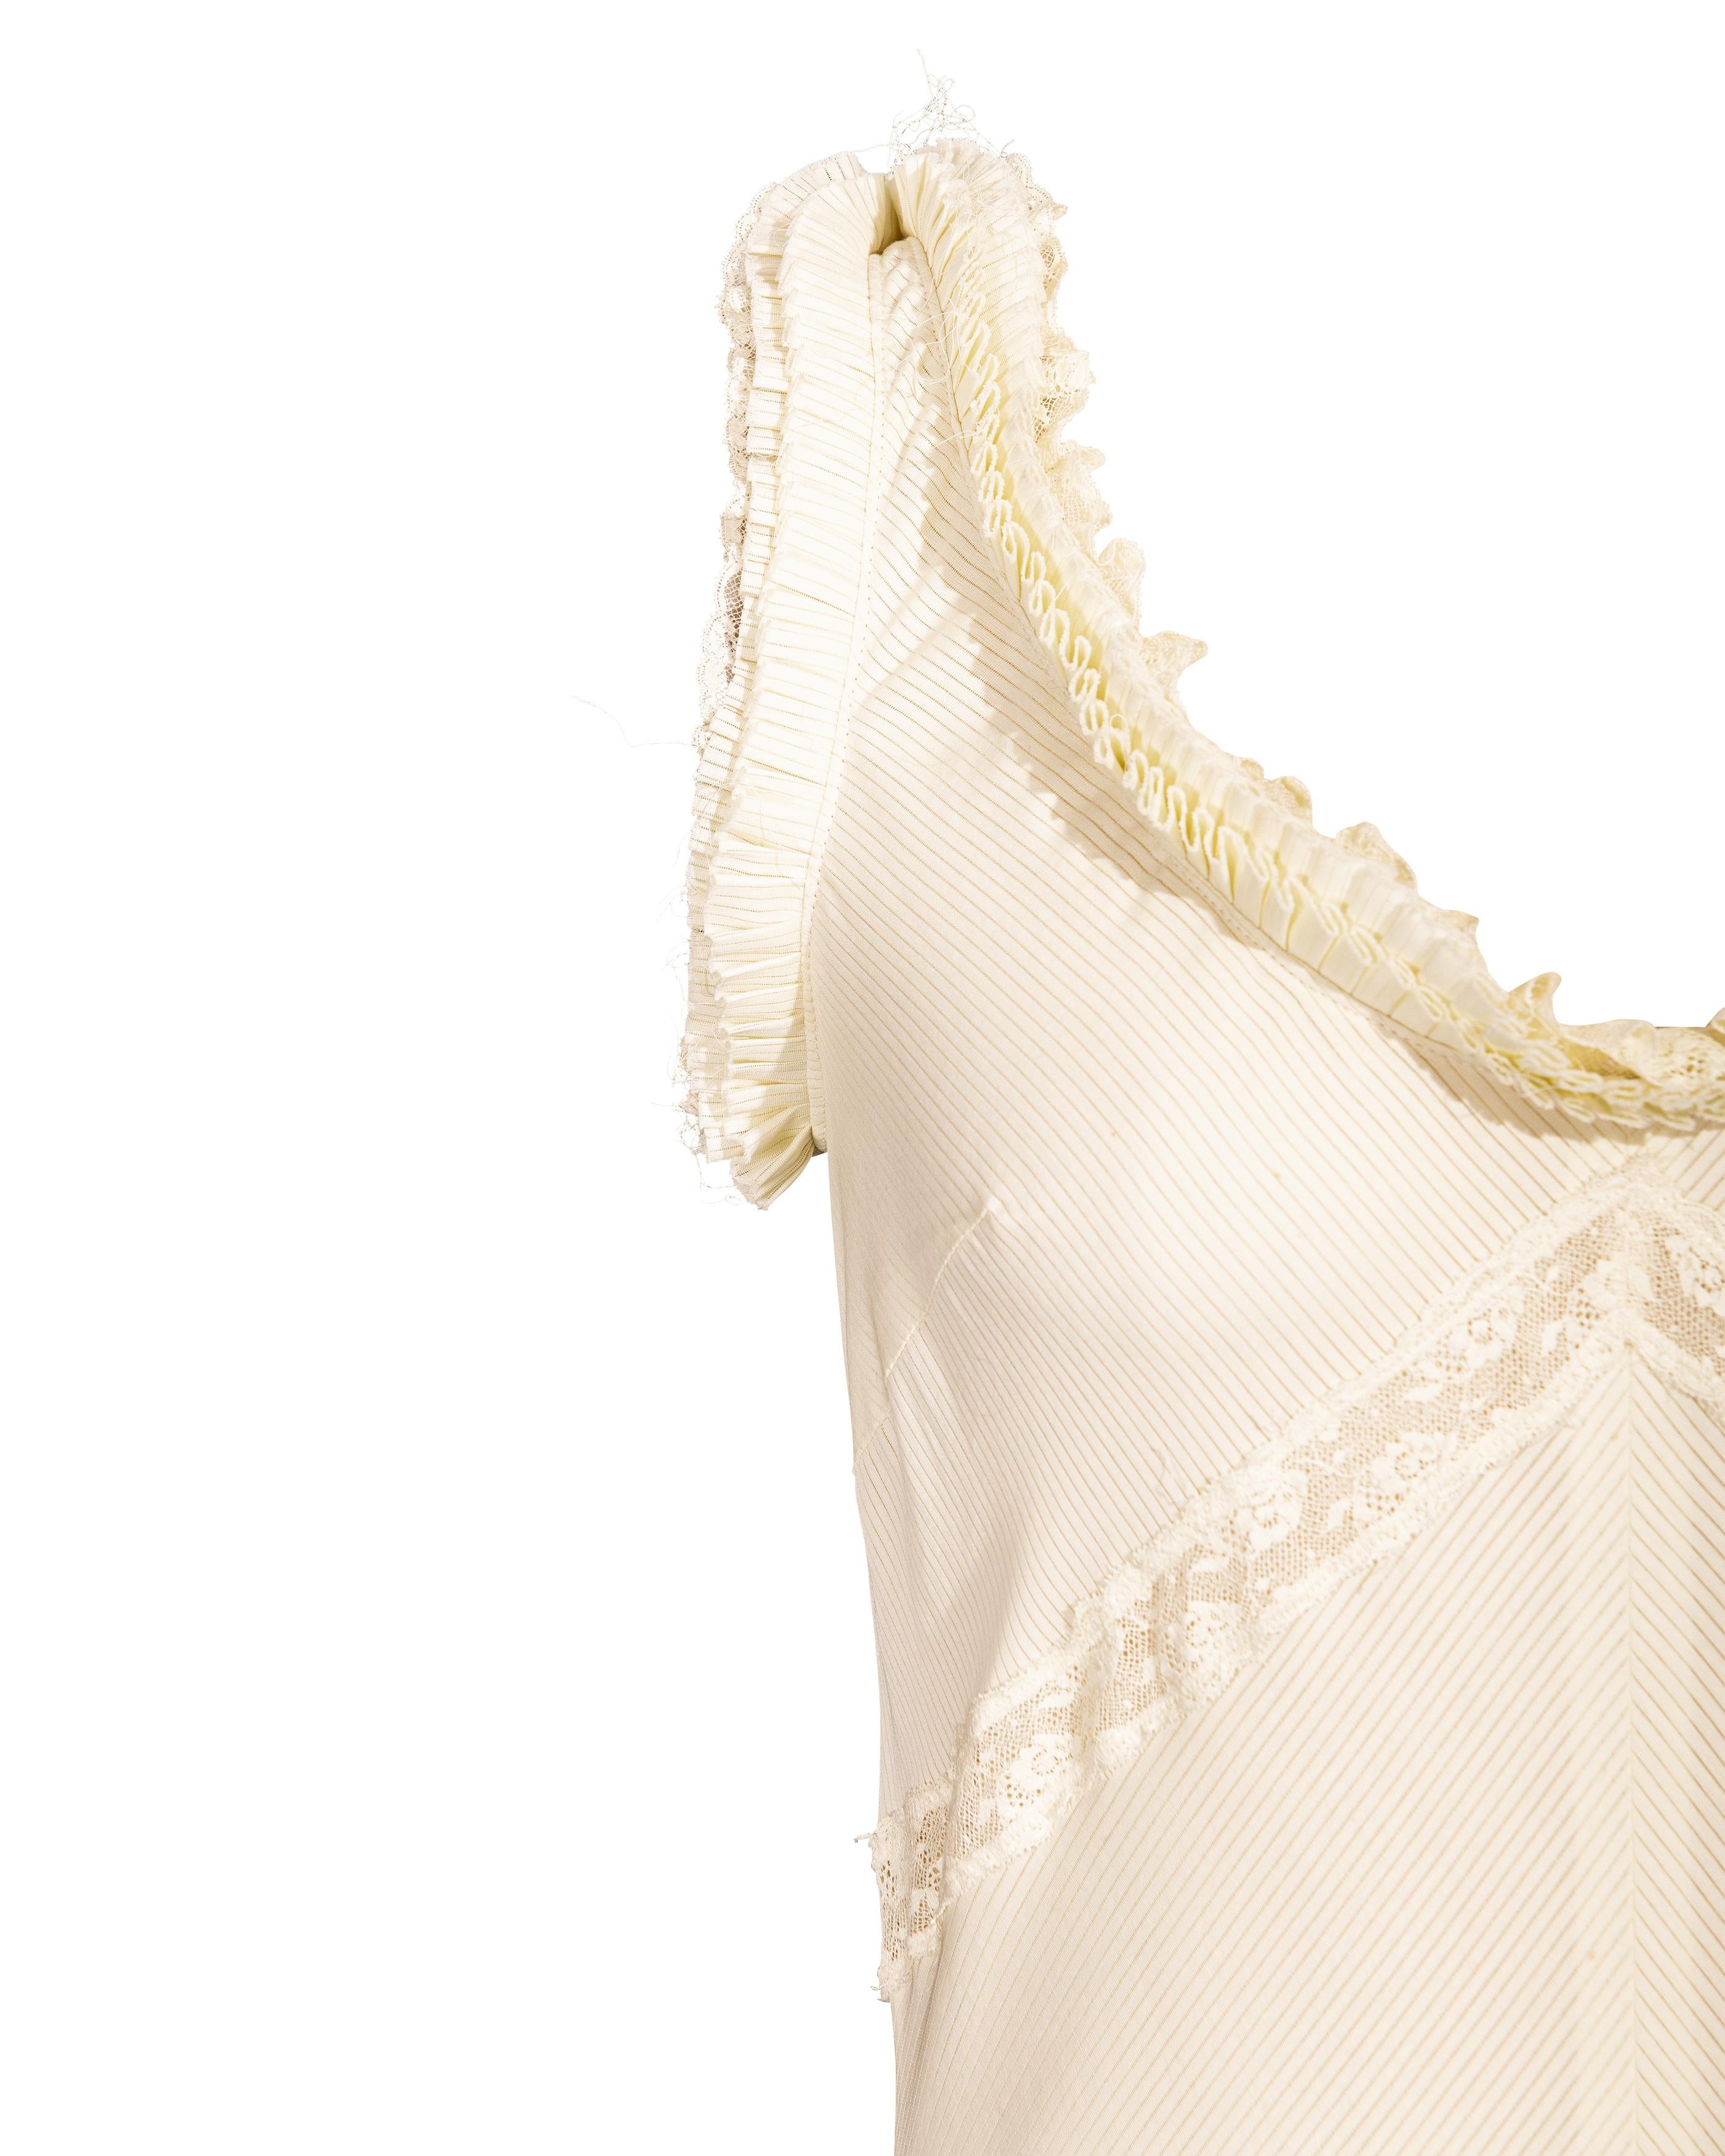 S/S 2005 Alexander McQueen (Lifetime) Pale Yellow Pleated and Lace Cotton Dress For Sale 4